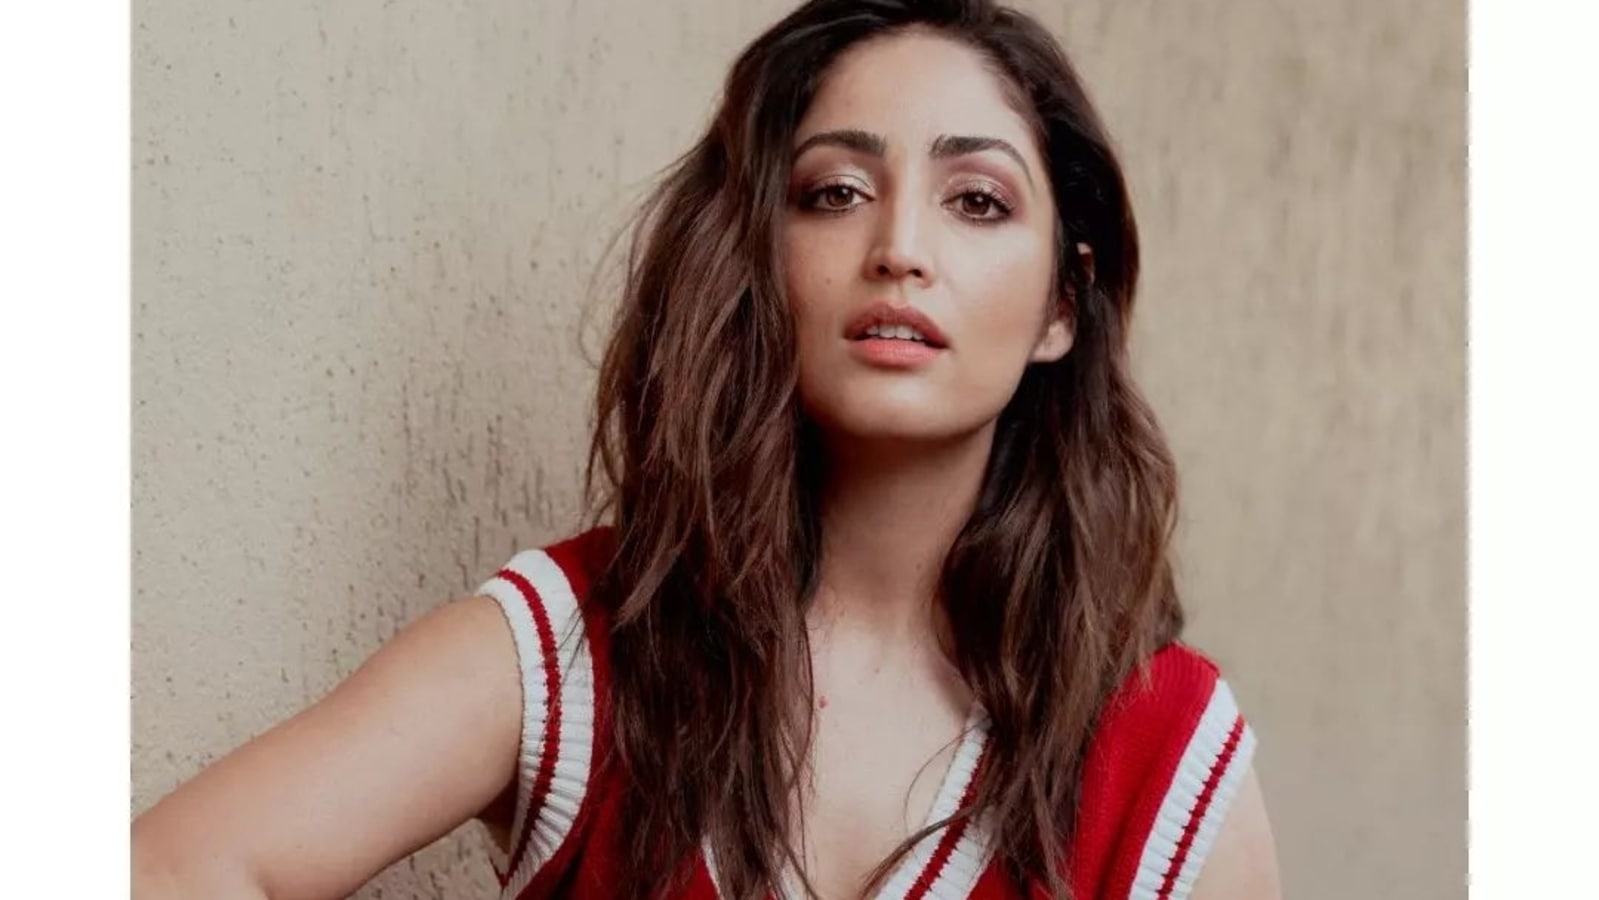 Yami Gautam gives sweater weather a sexy spin in red cut sleeves pullover, jeans Hindustan Times